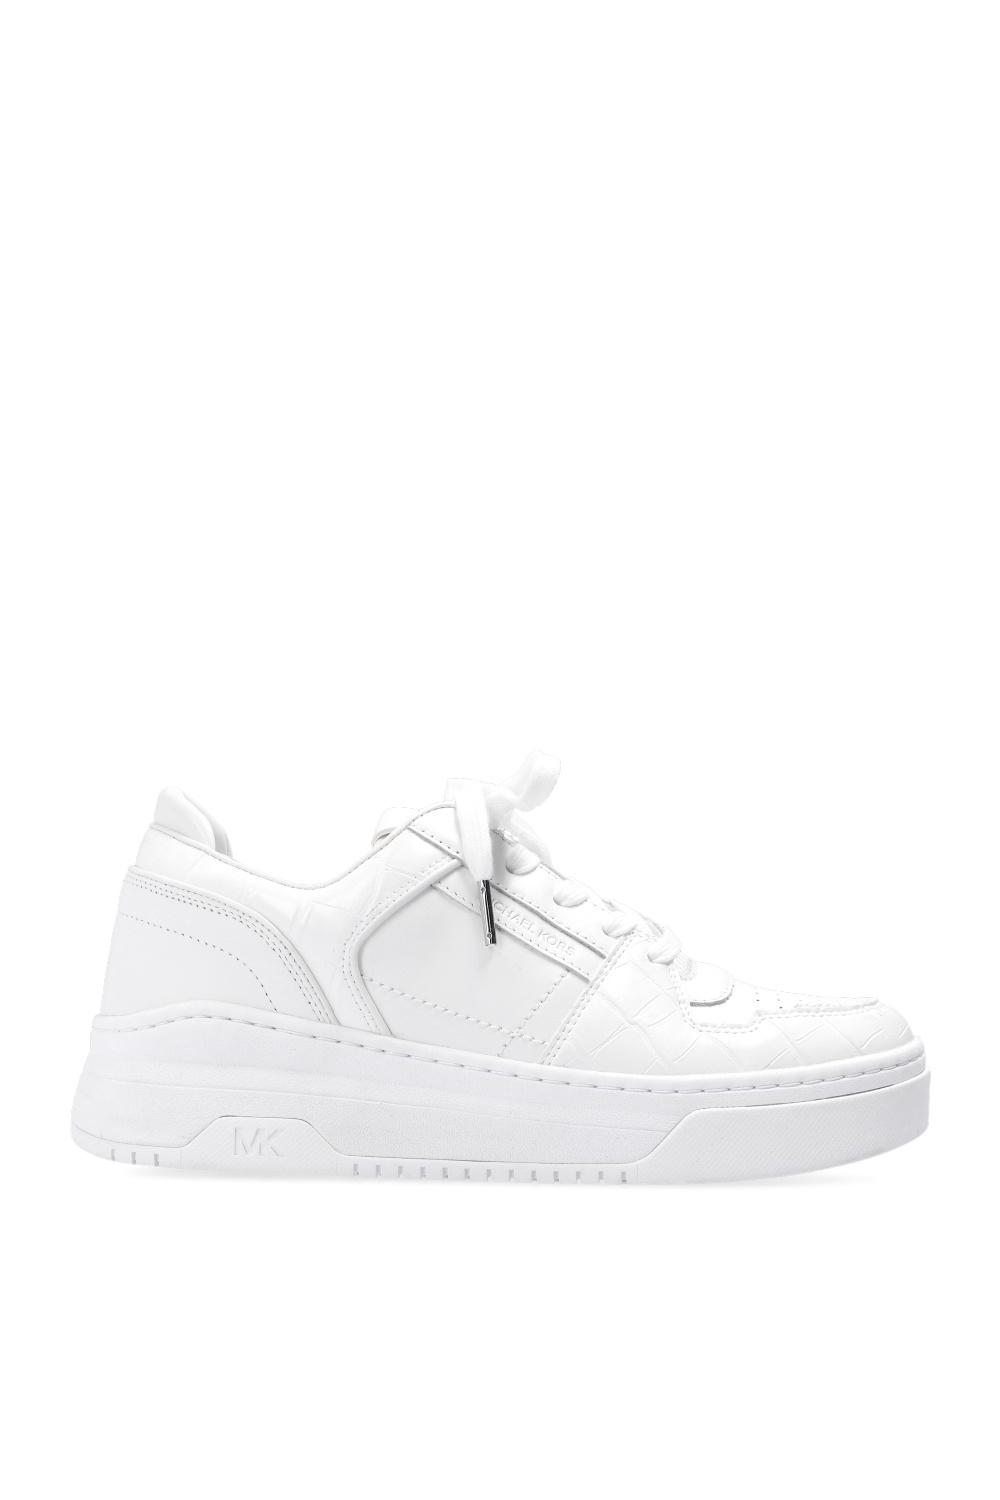 MICHAEL Michael Kors 'lexi' Lace-up Sneakers in White | Lyst Australia